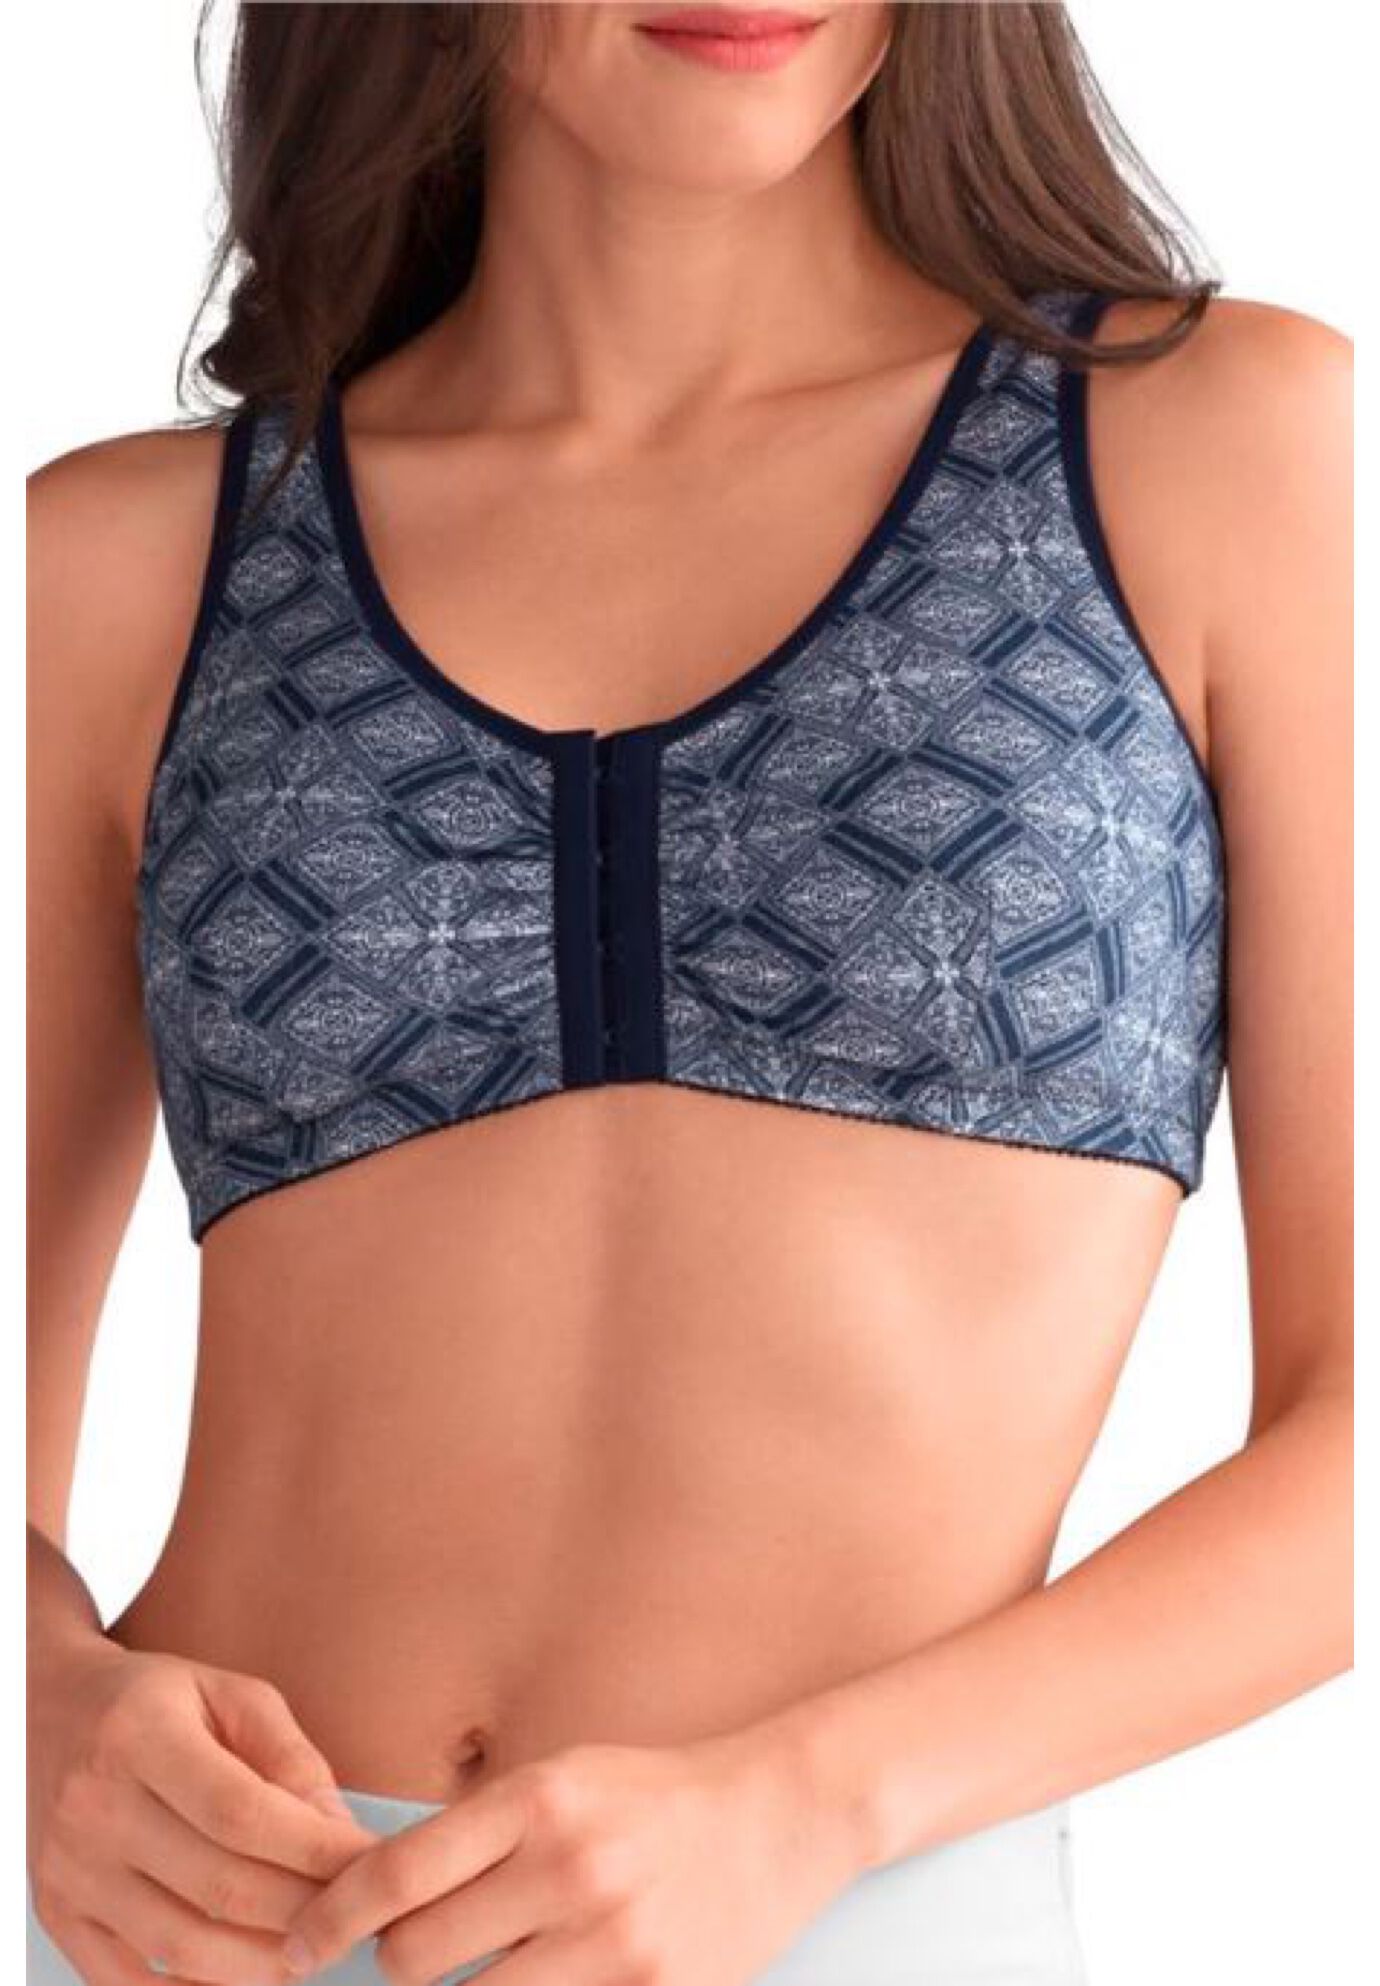 Plus Size Women's Amoena Frances Wire Free Leisure Bra 2128 by Amoena in Blue White (Size XS A)